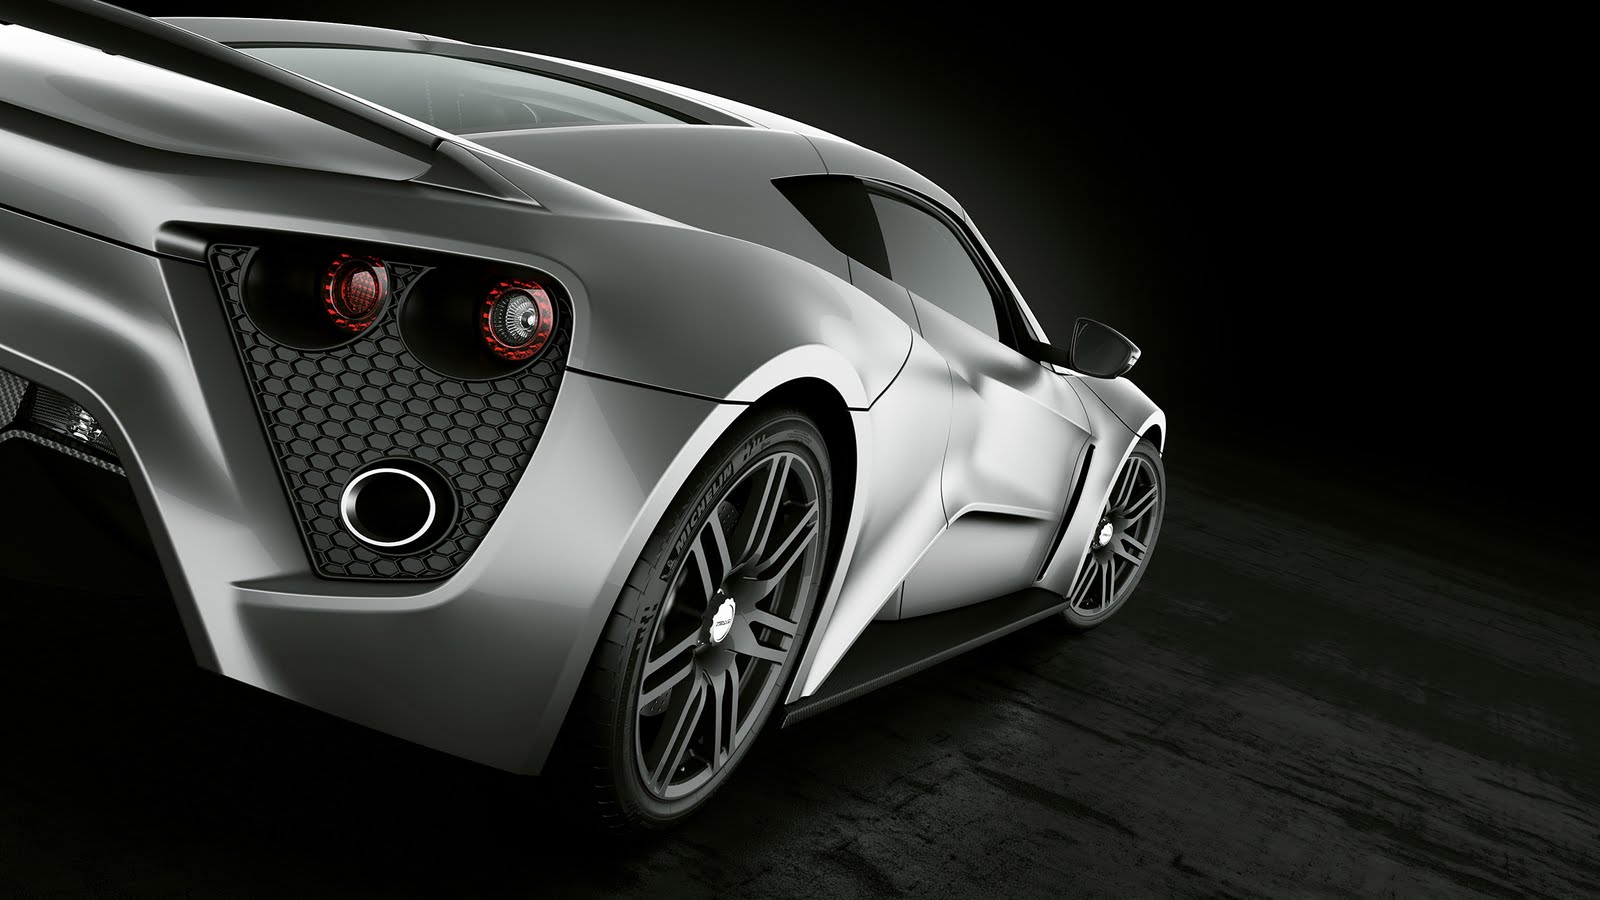 Wallpapers Box: Zenvo SuperCar PC High Definition Wallpapers